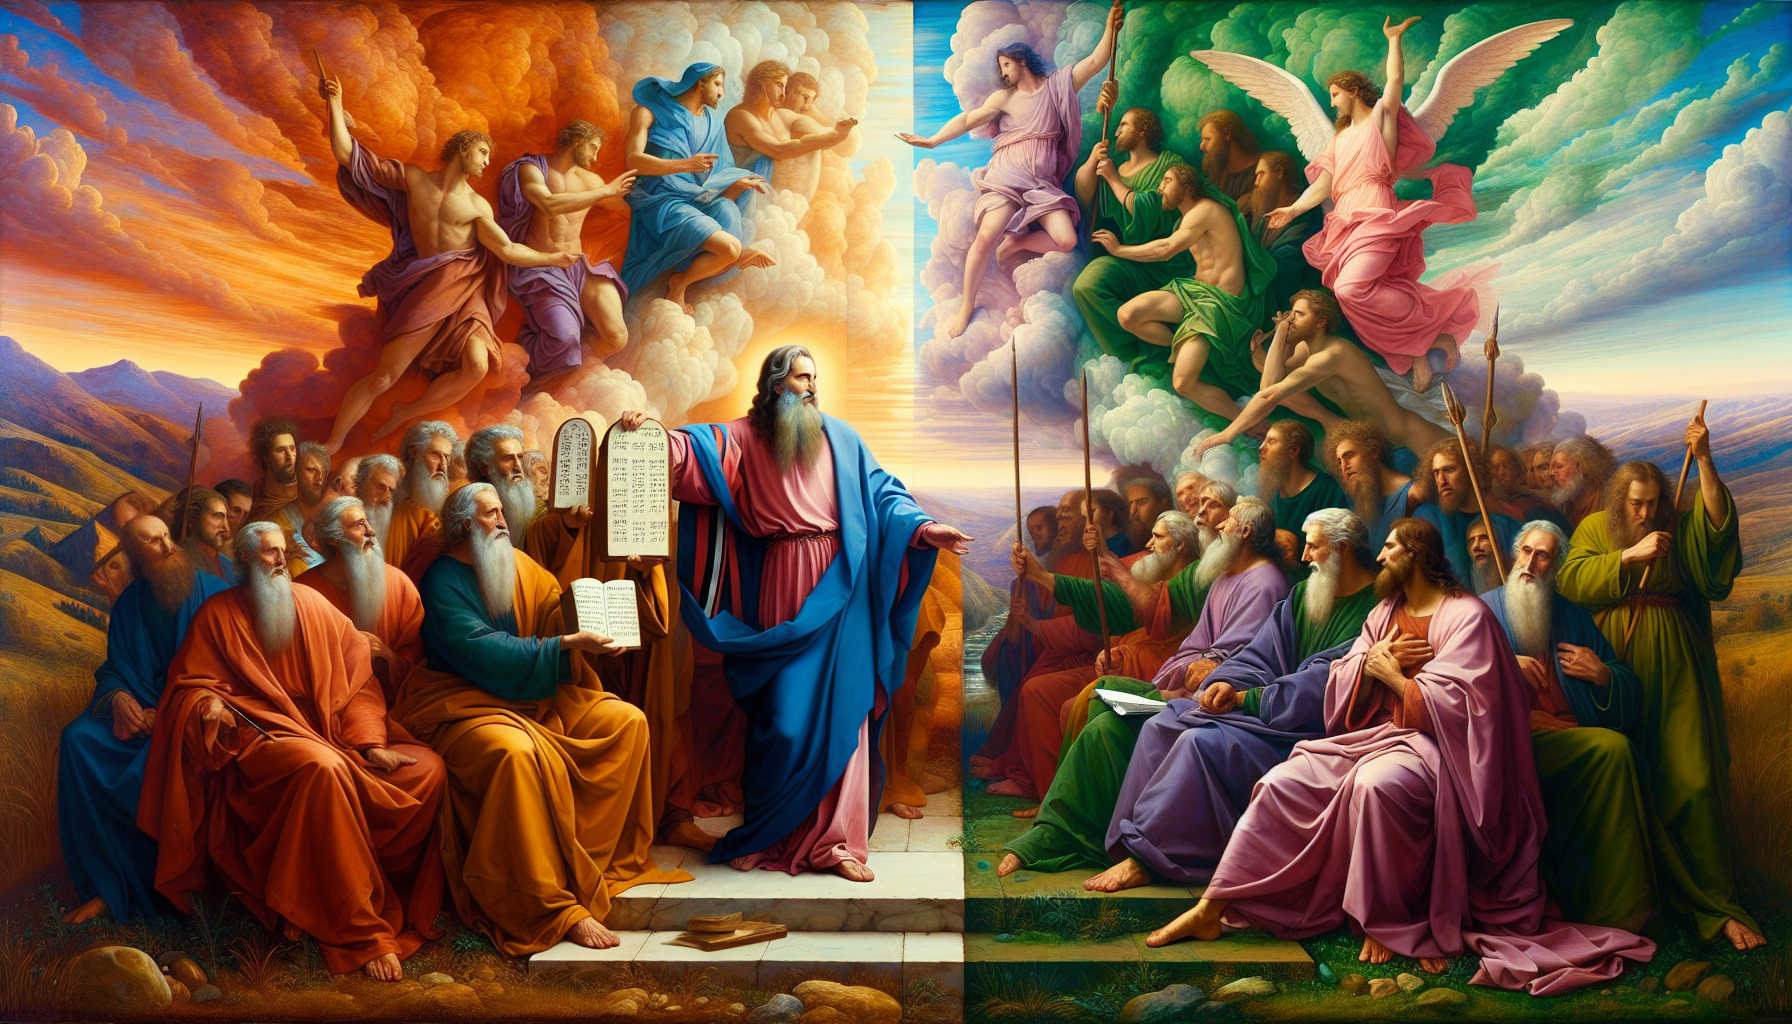 Artistic representation of a split image comparing scenes from the Old Testament and the New Testament, with Moses holding the Ten Commandments on the left and Jesus giving the Sermon on the Mount on